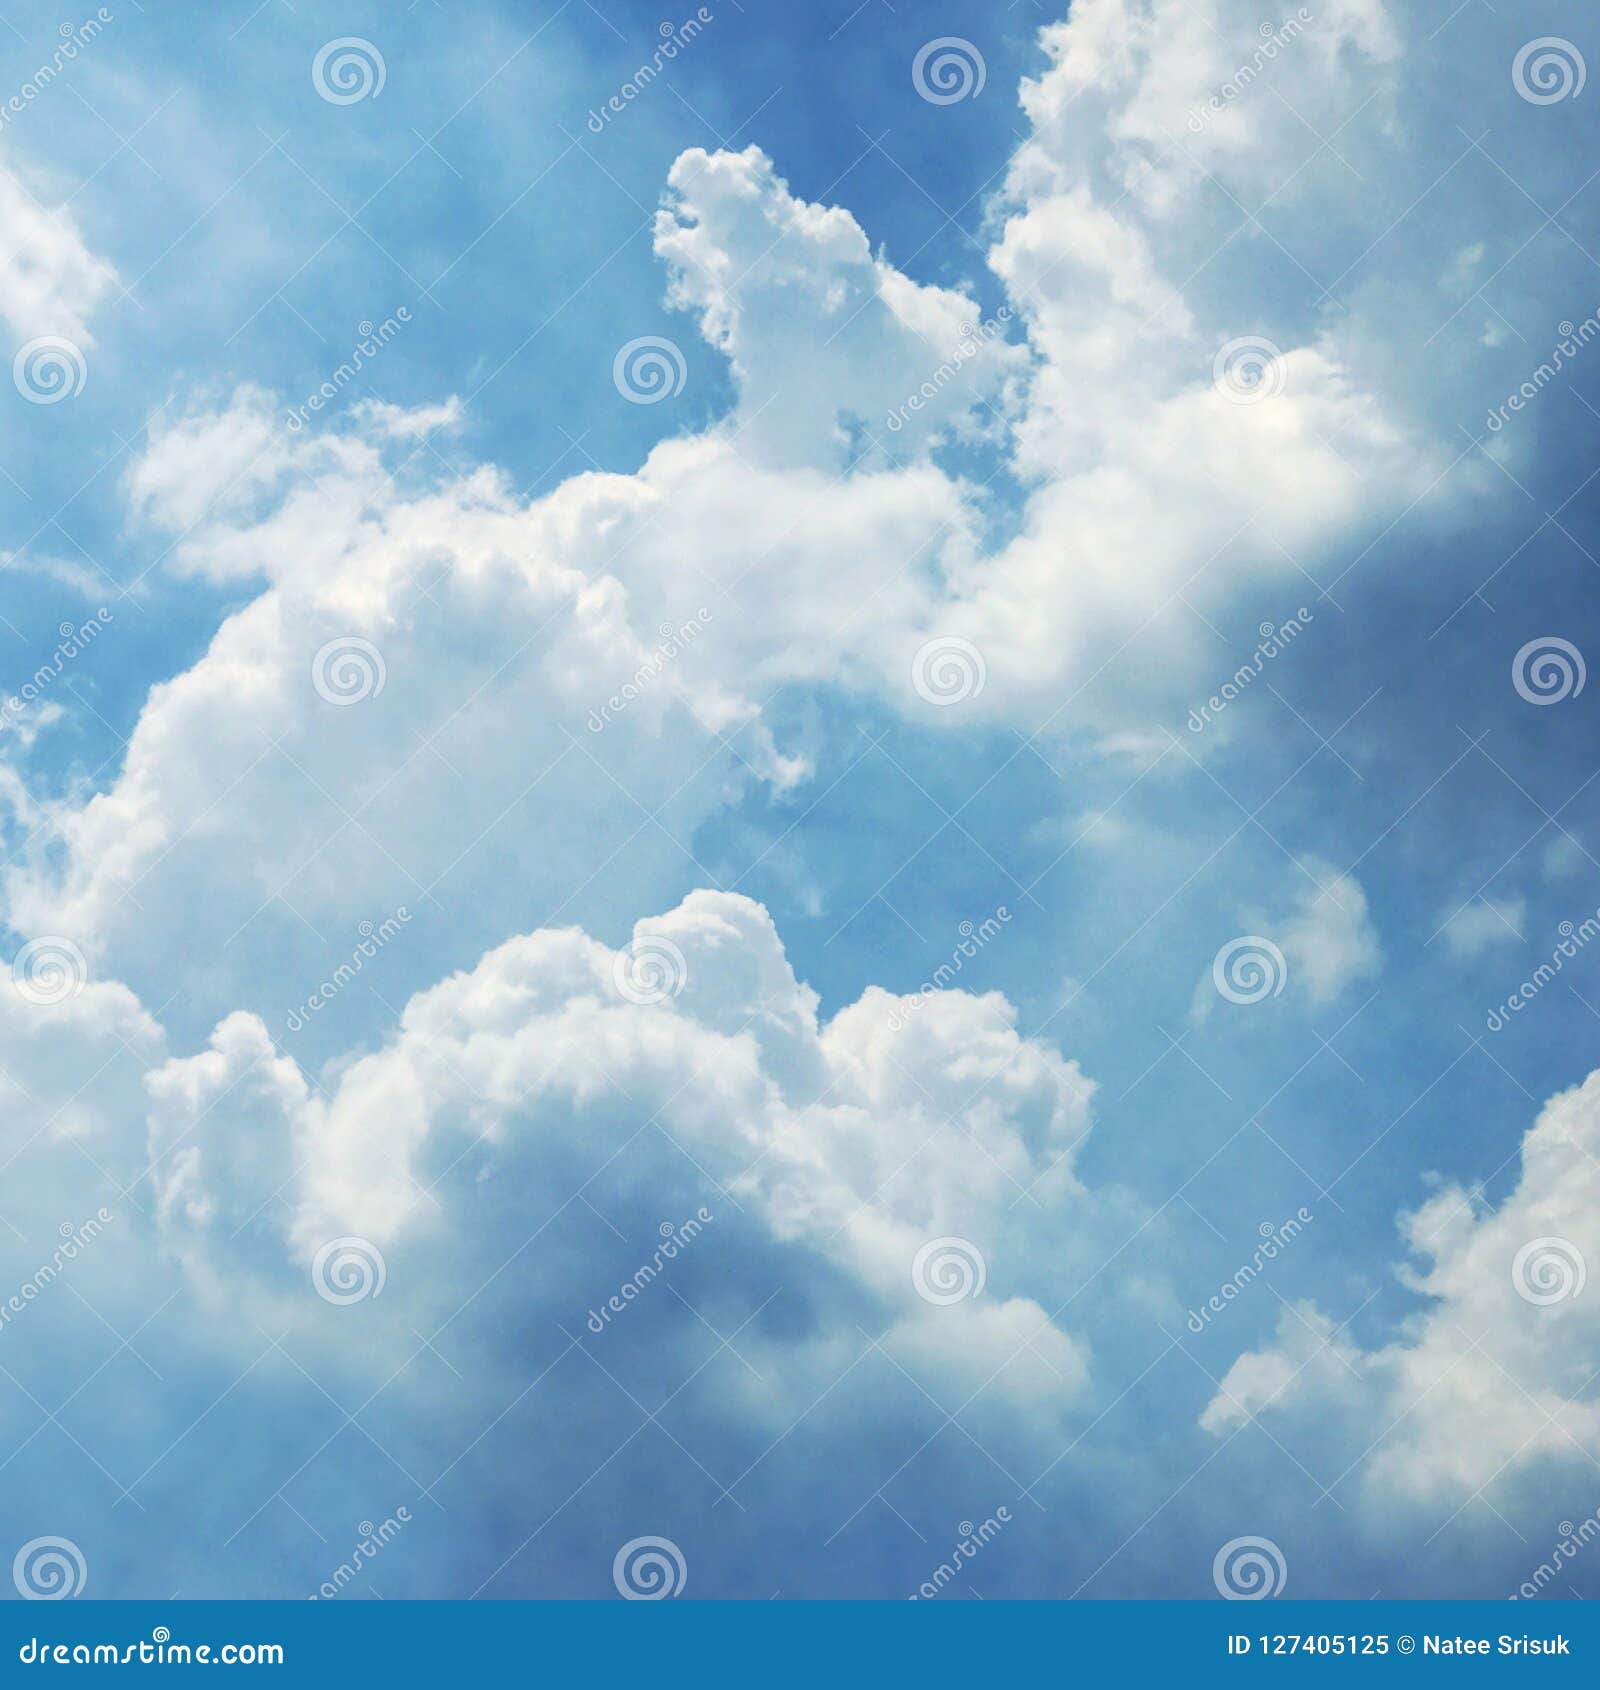 Blue Sky with Cloud Background Stock Image - Image of environment ...